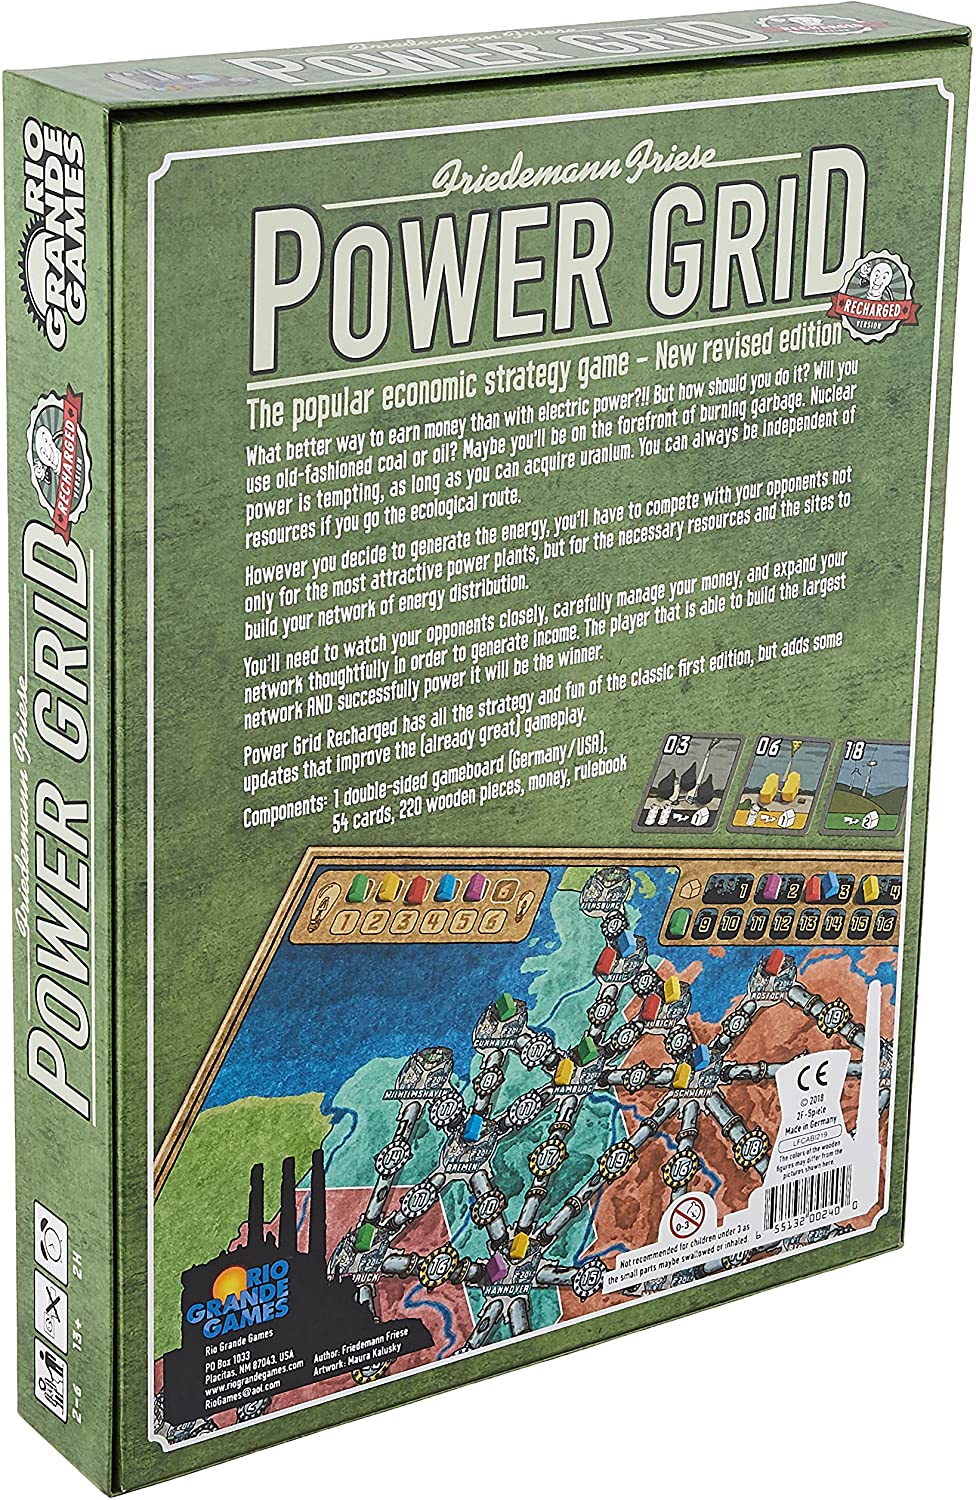 Find out about Power Grid